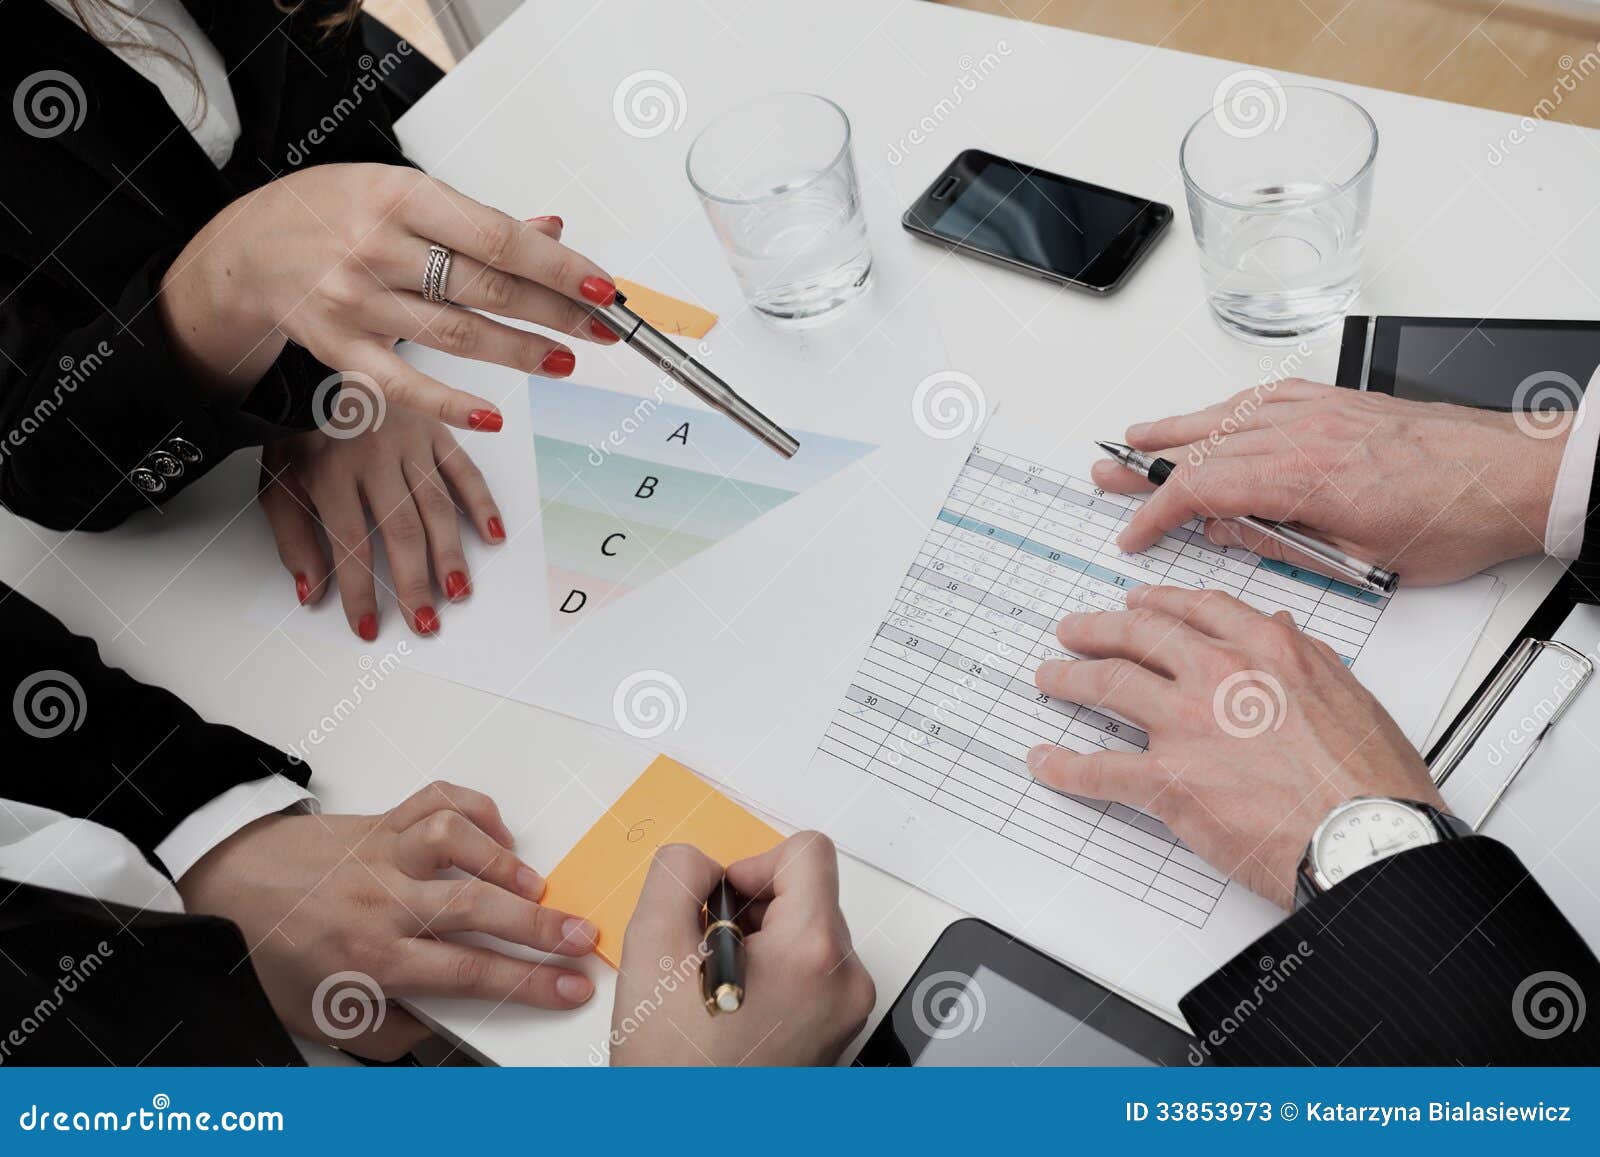 business people analyzing the agenda